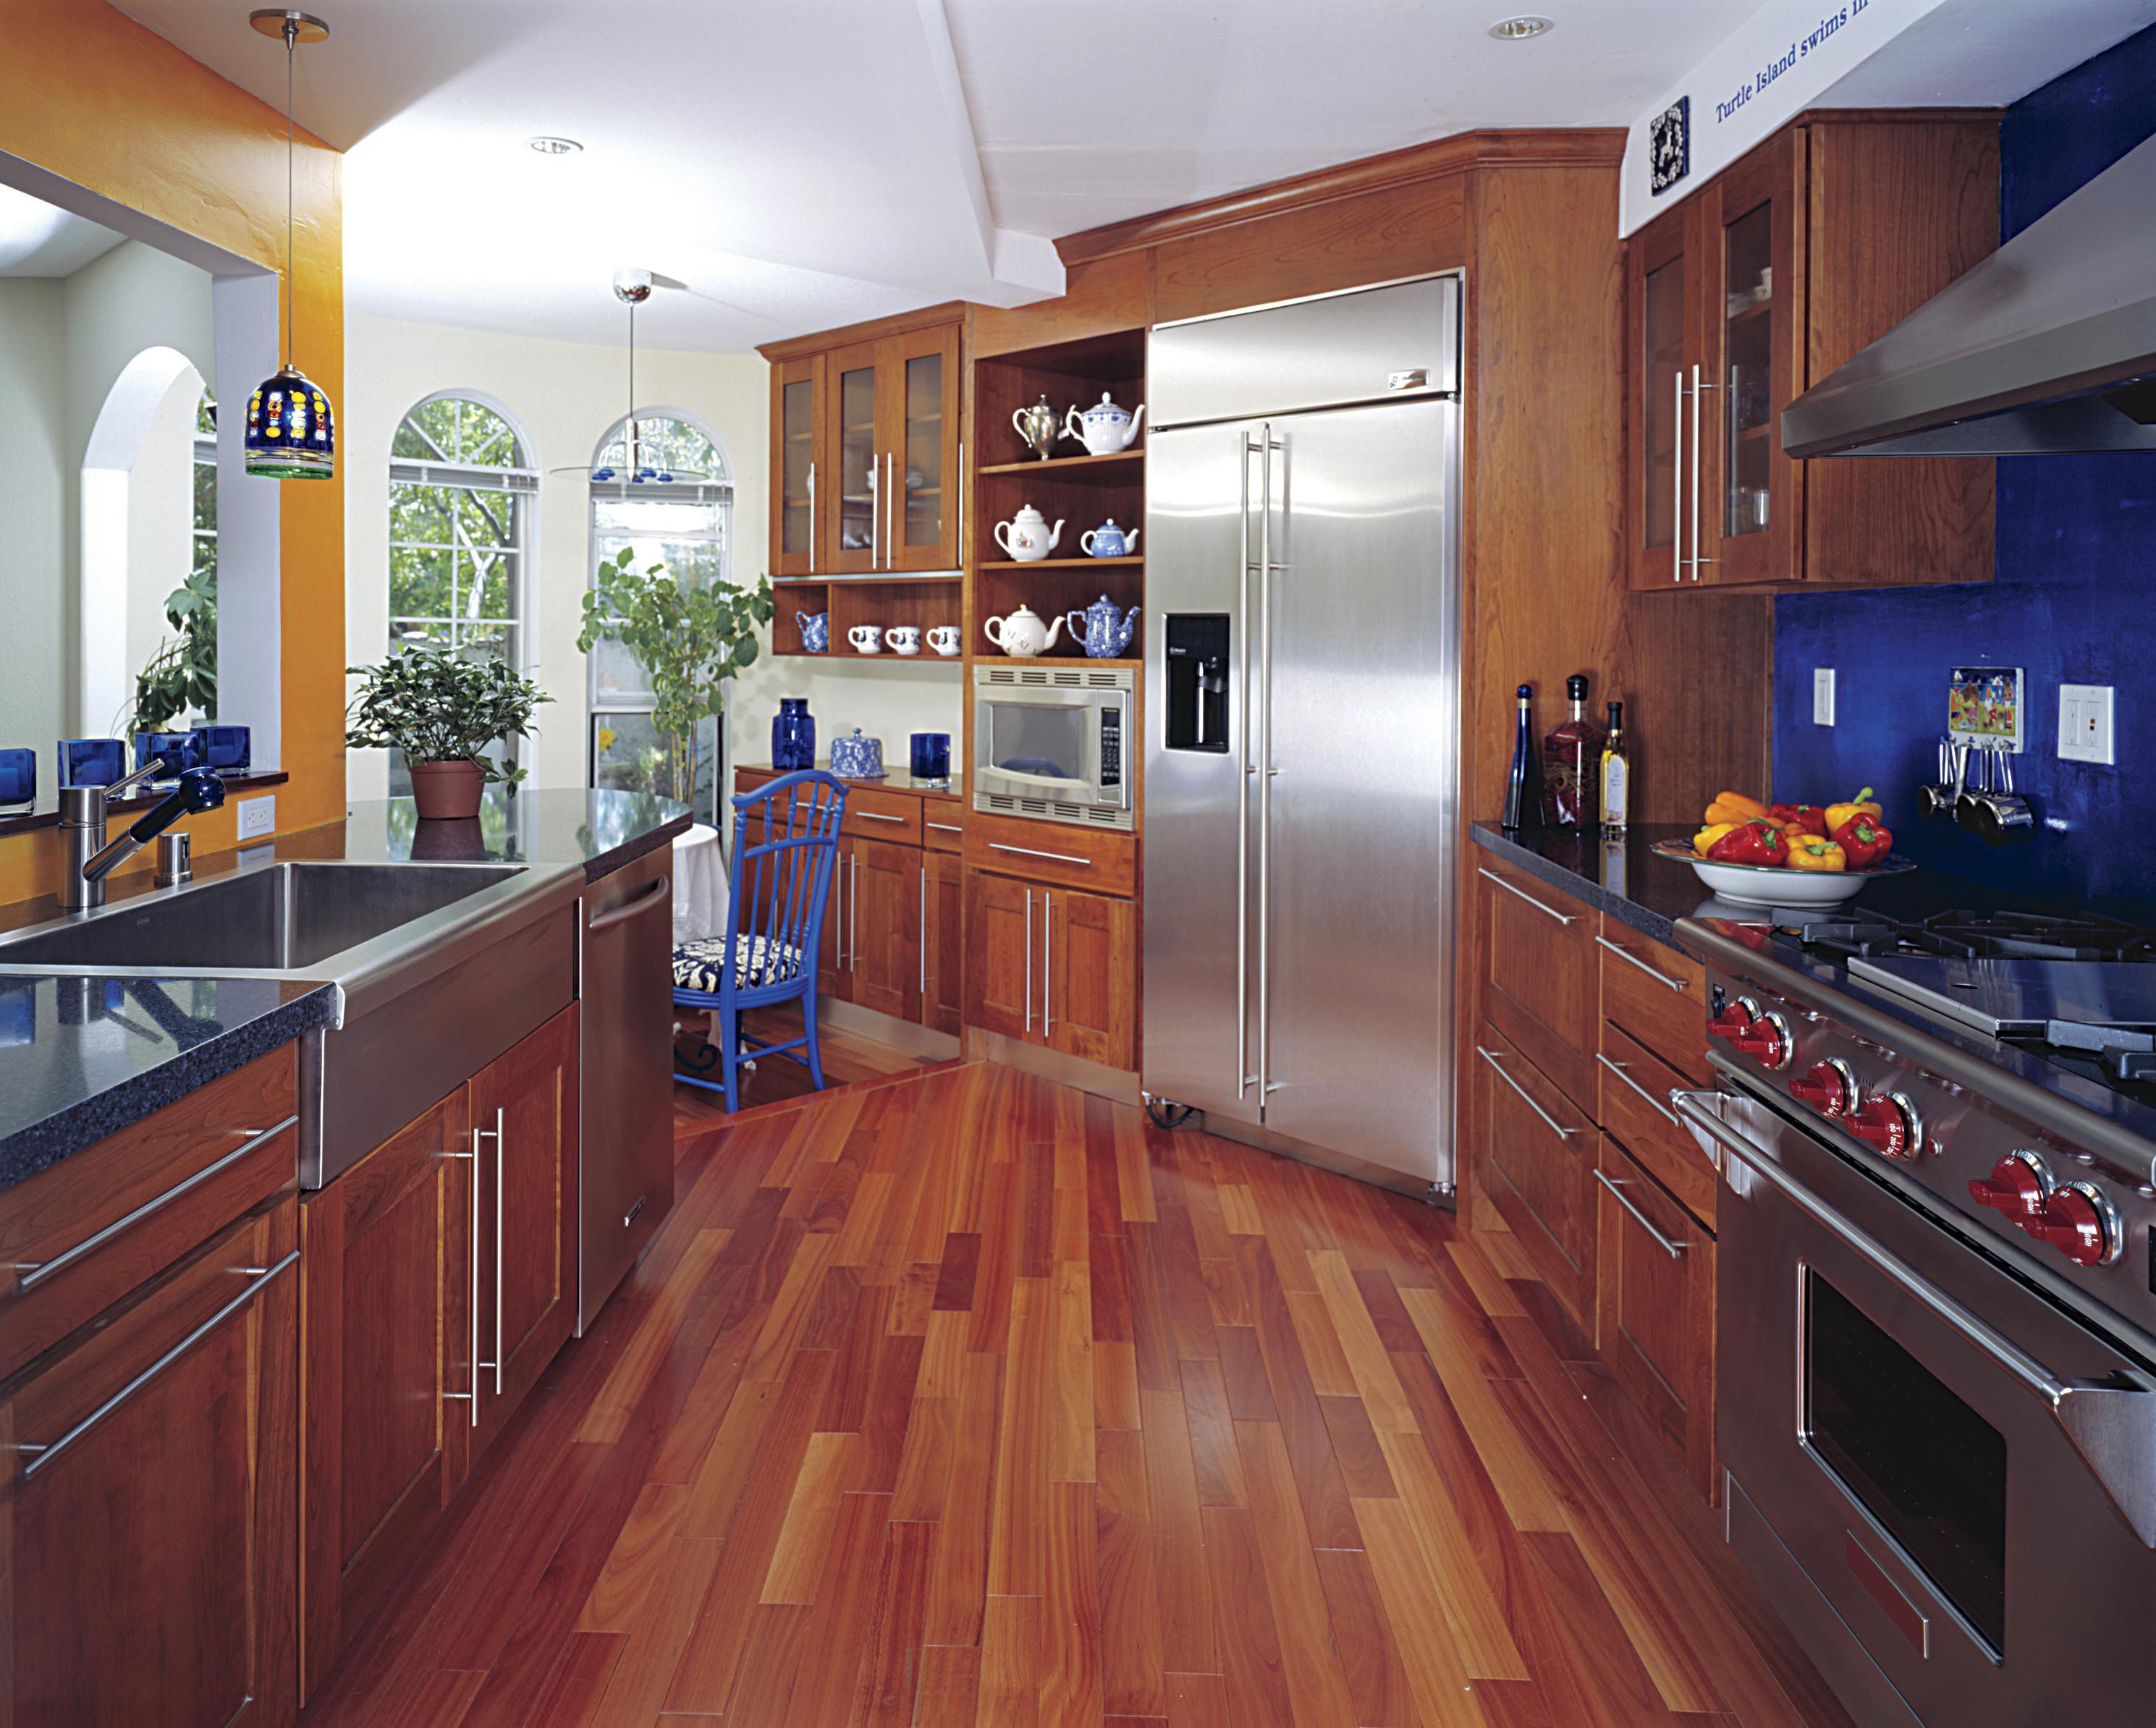 30 Stylish Dark or Light Hardwood Floors 2024 free download dark or light hardwood floors of hardwood floor in a kitchen is this allowed intended for 186828472 56a49f3a5f9b58b7d0d7e142